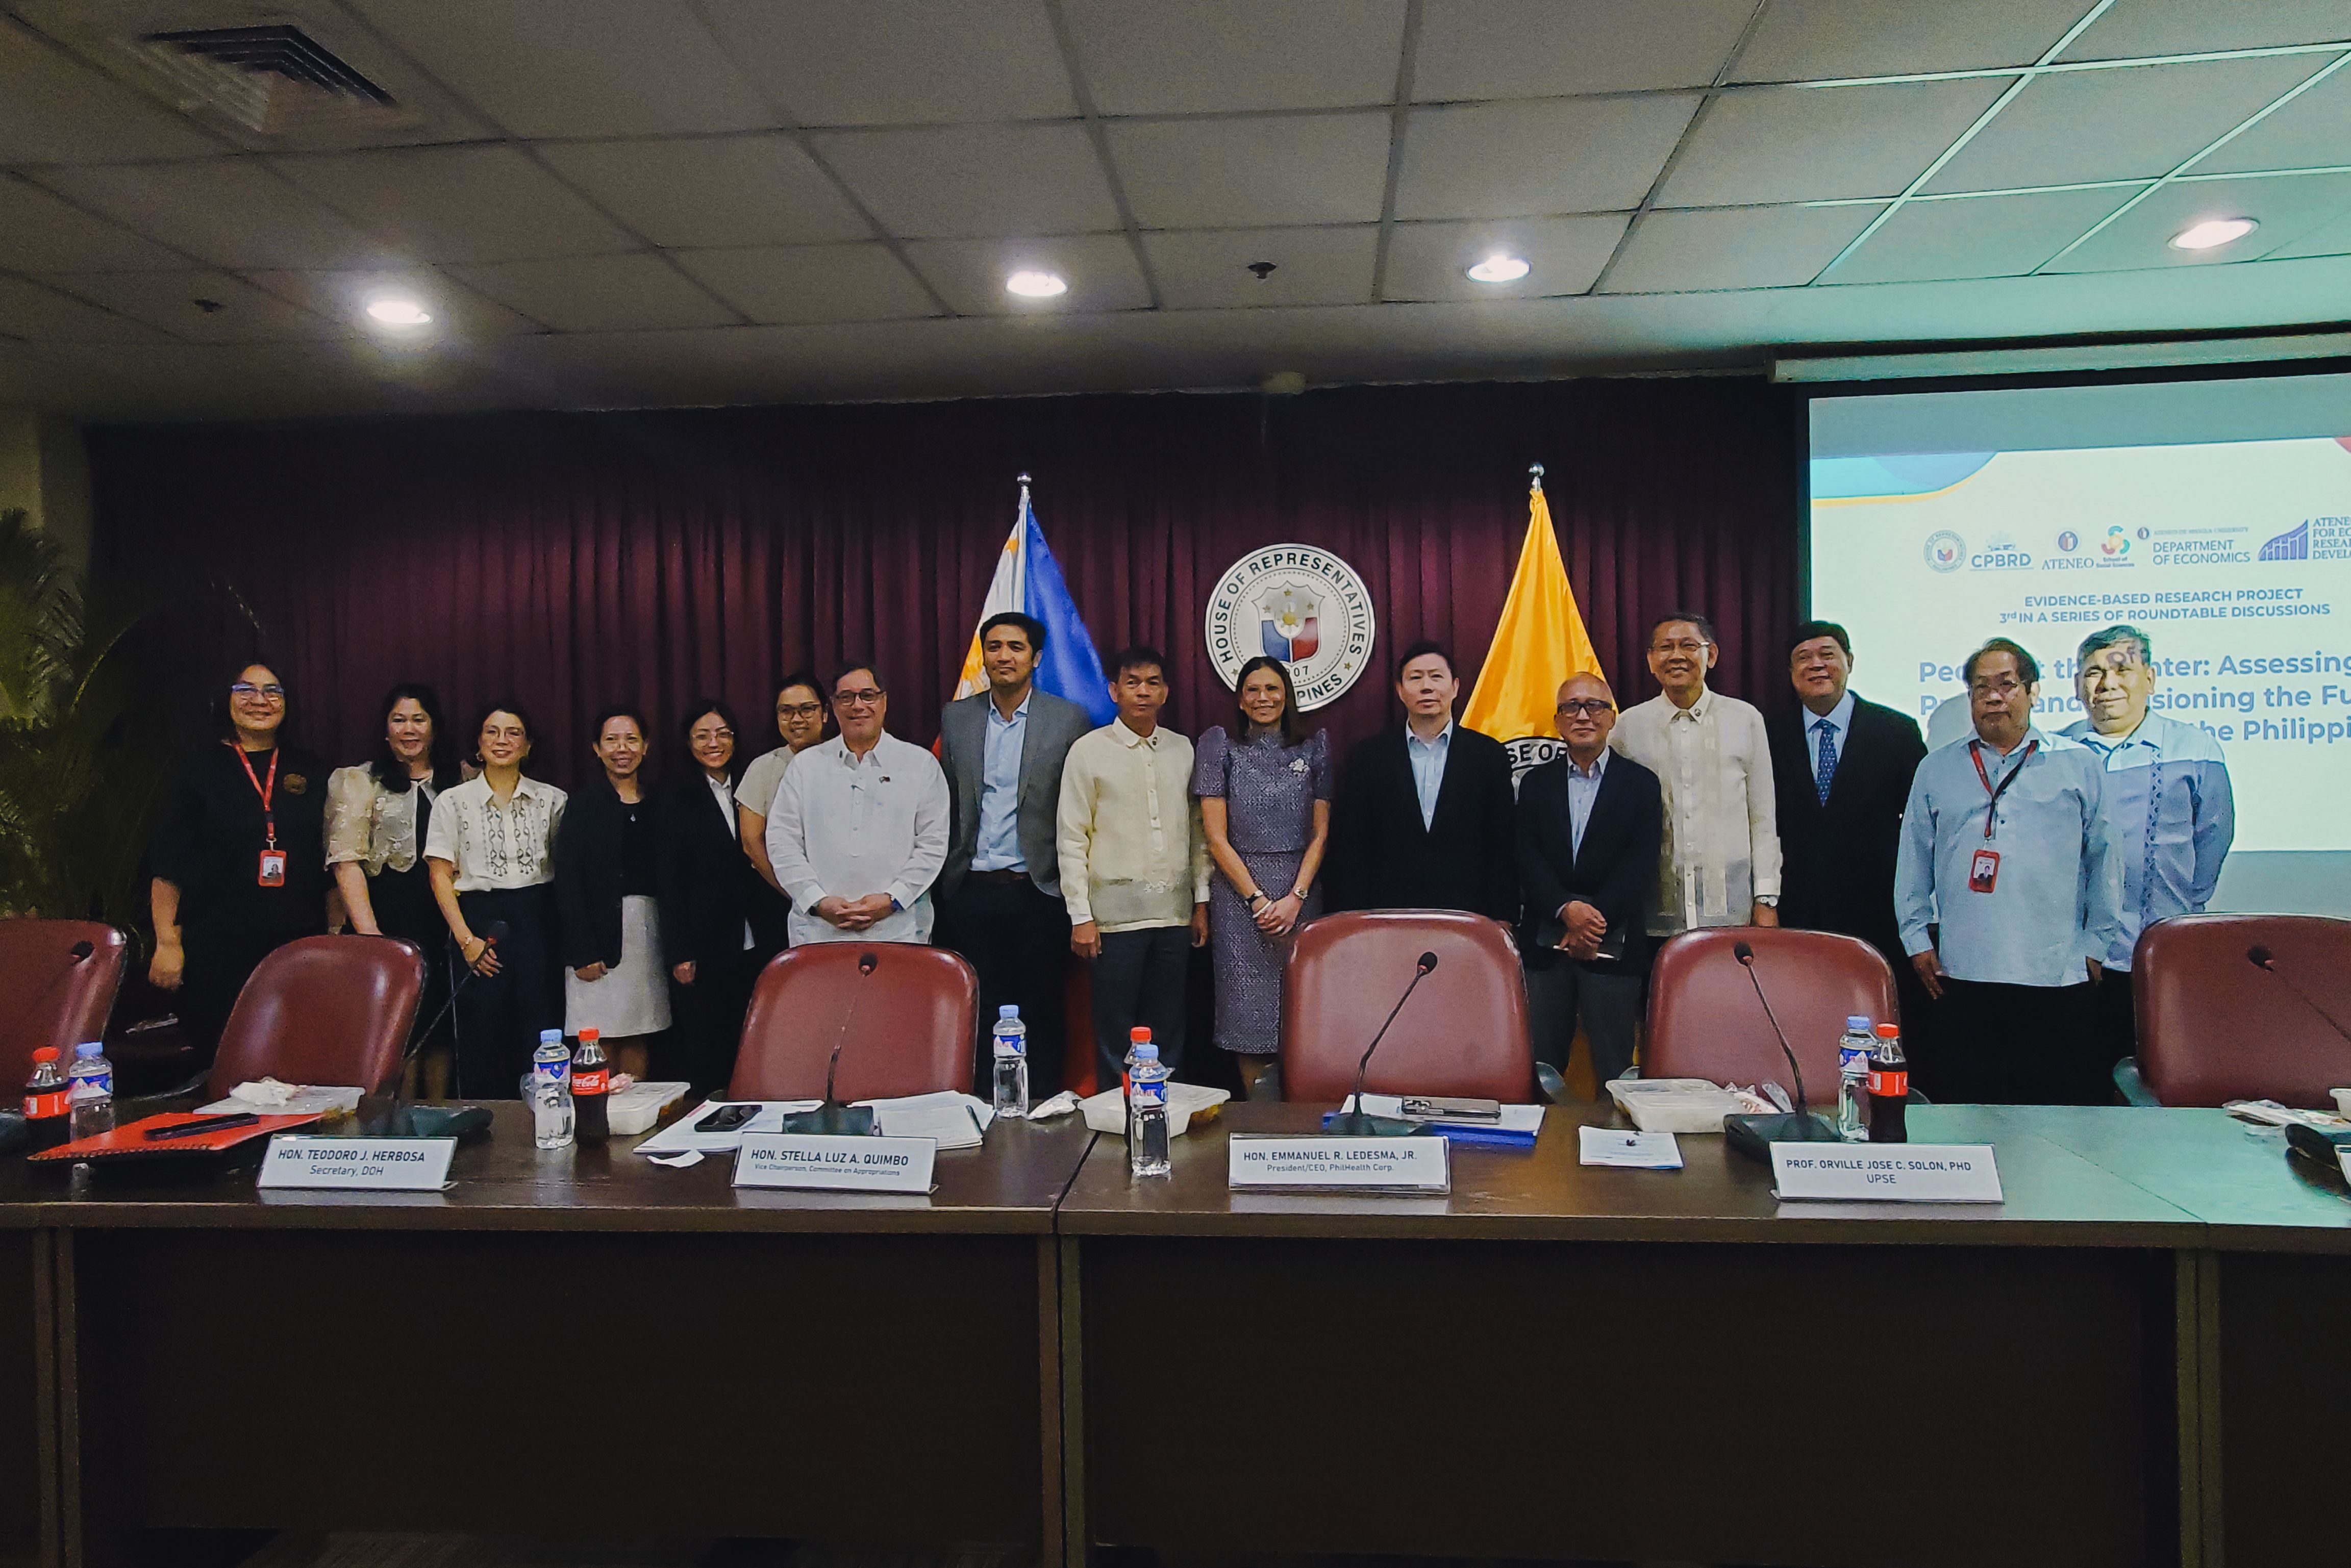 Representative Stella Luz Quimbo, the Panelists, ADMU-HRep Health Research TeamCPBRD  staff, and the rest of HREP-ADMU Congressional Research Fellows